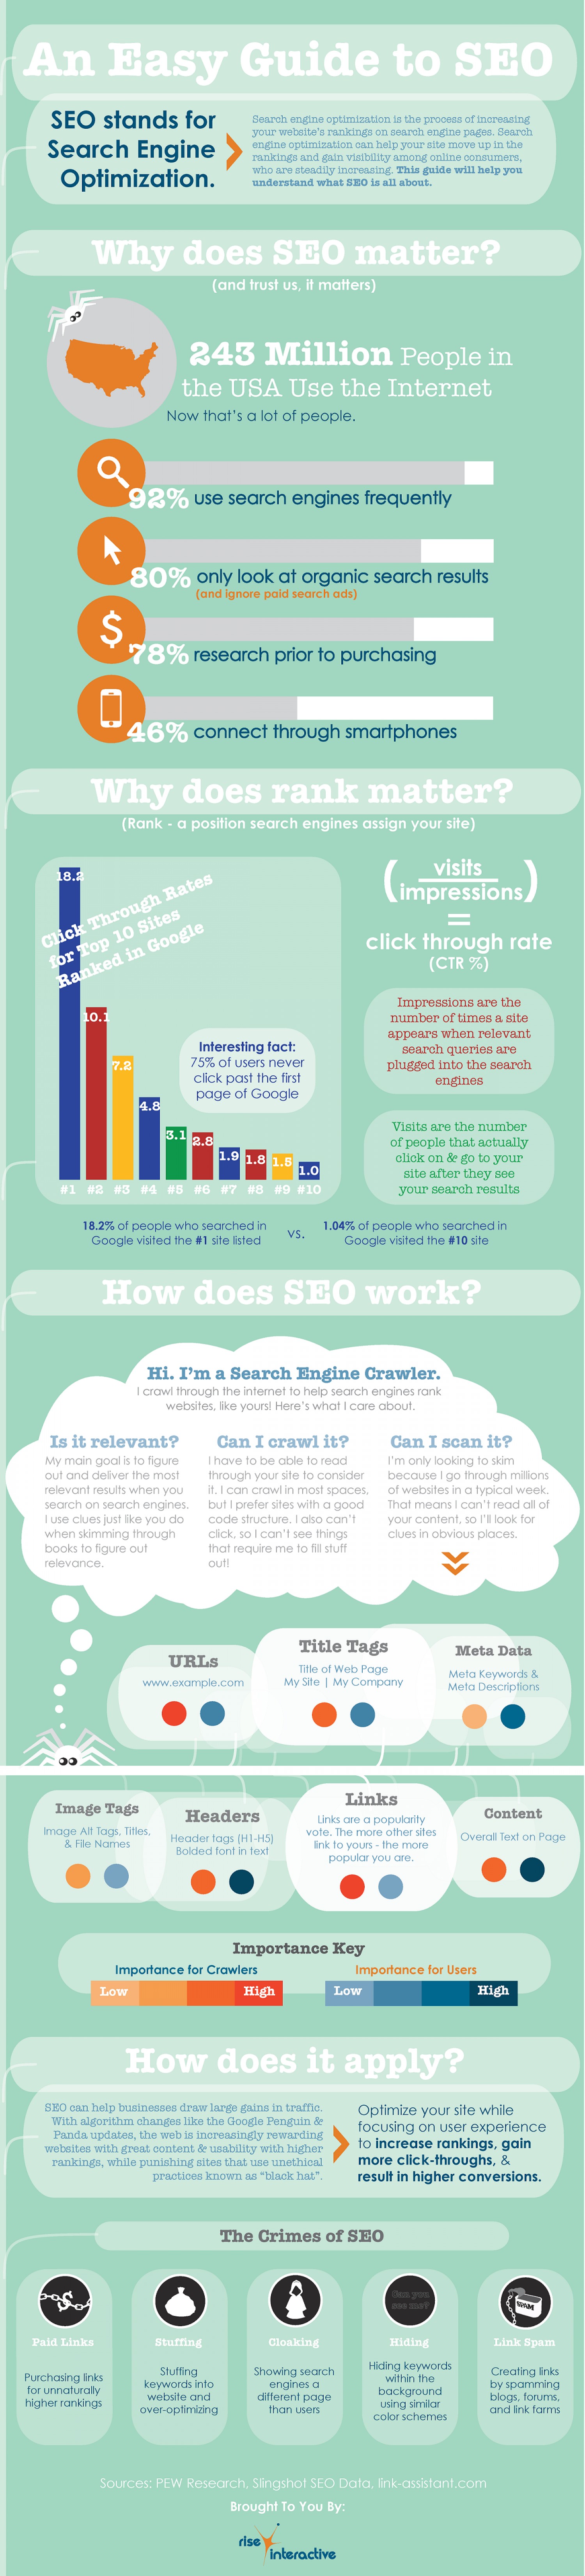 An Easy Guide to SEO